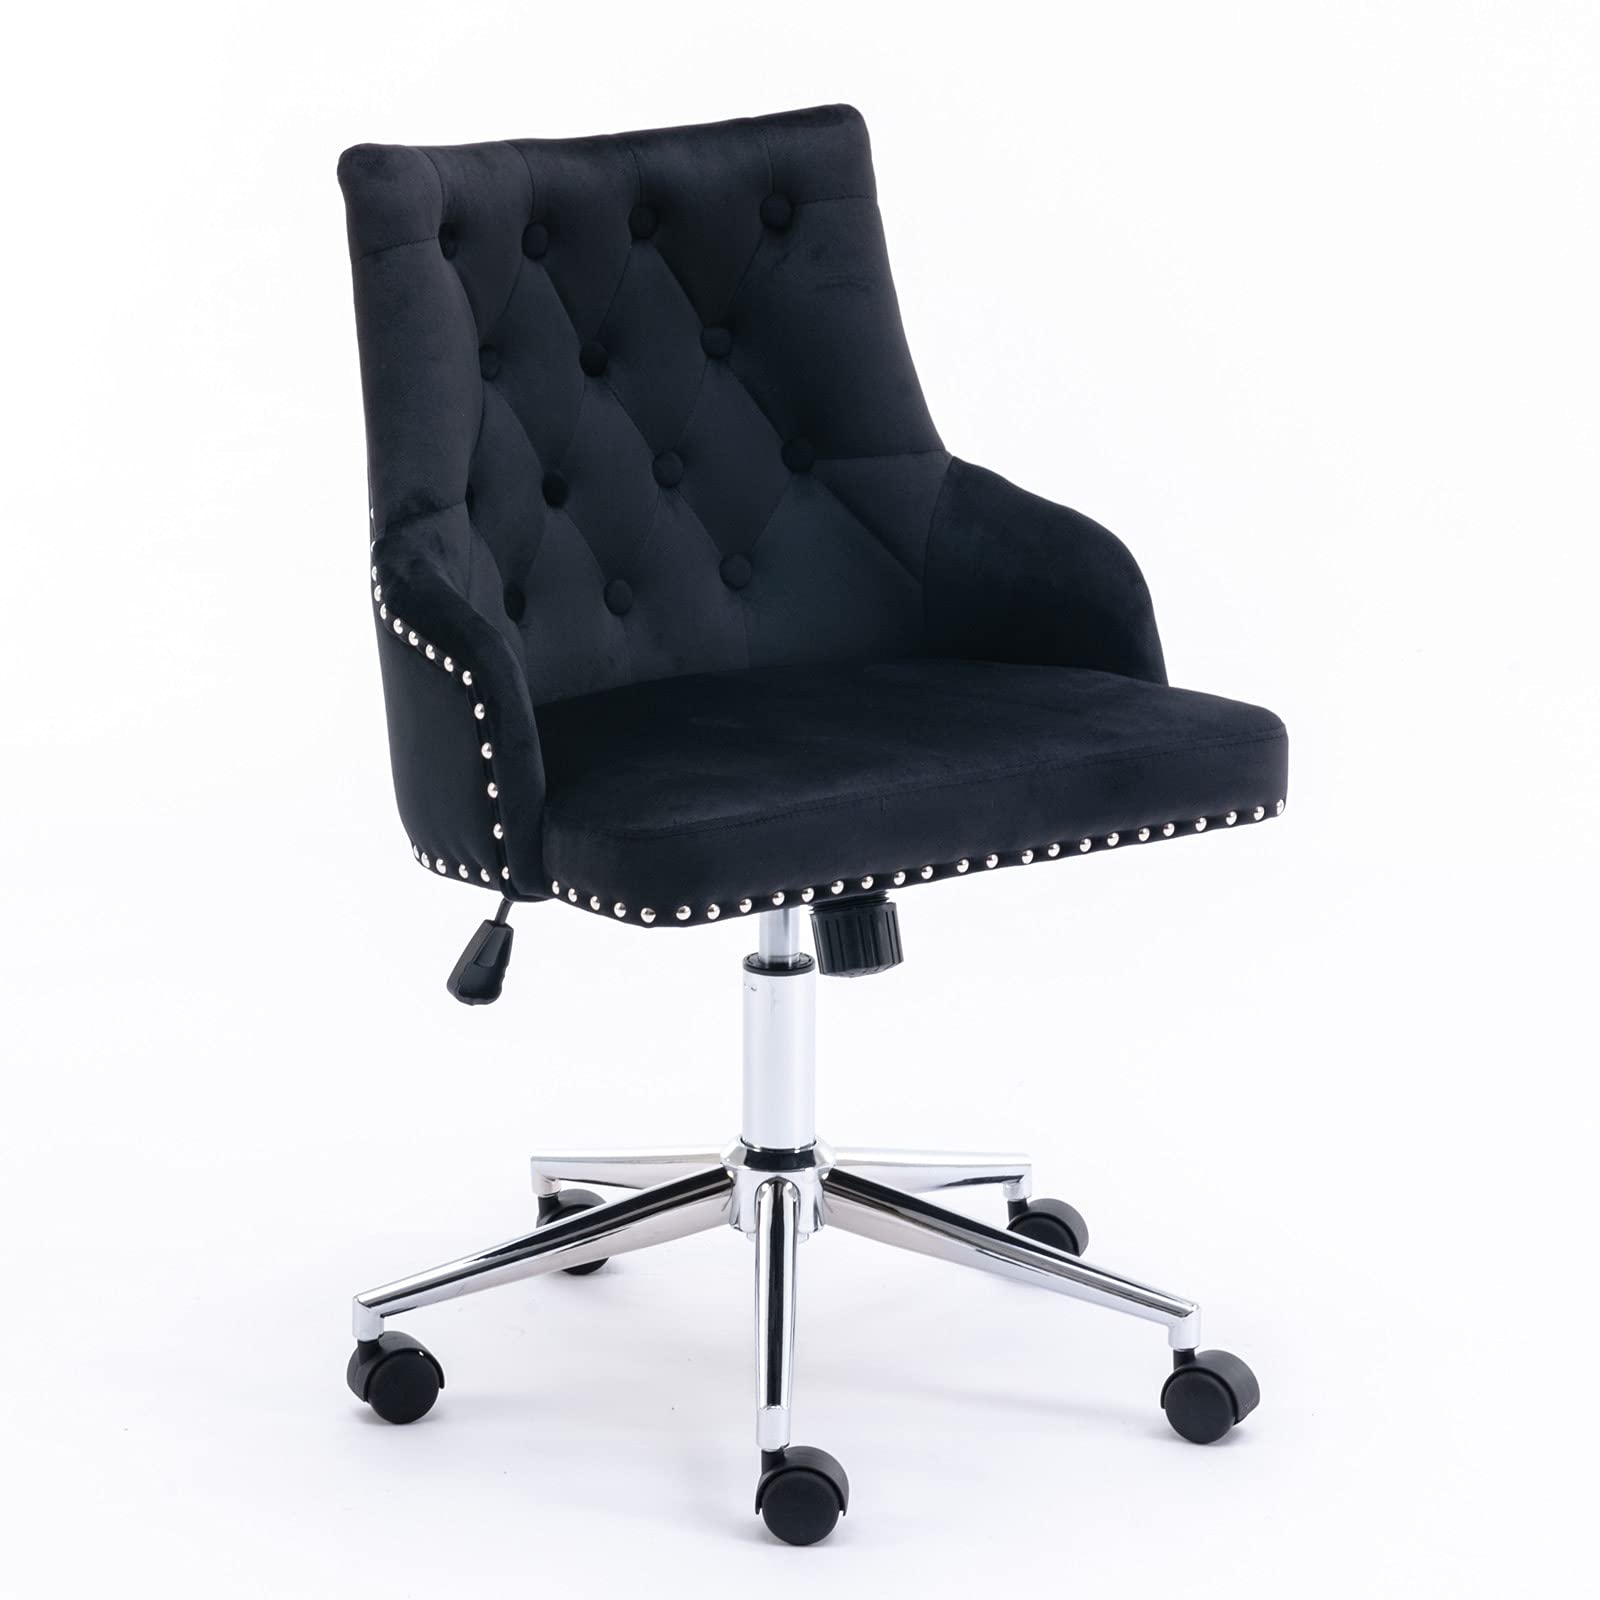 Velvet Desk Chair Tufted Office Chair with Wheels Accent Vanity Chair Fabric Task Swivel Armchair for Bedroom Living Room Black